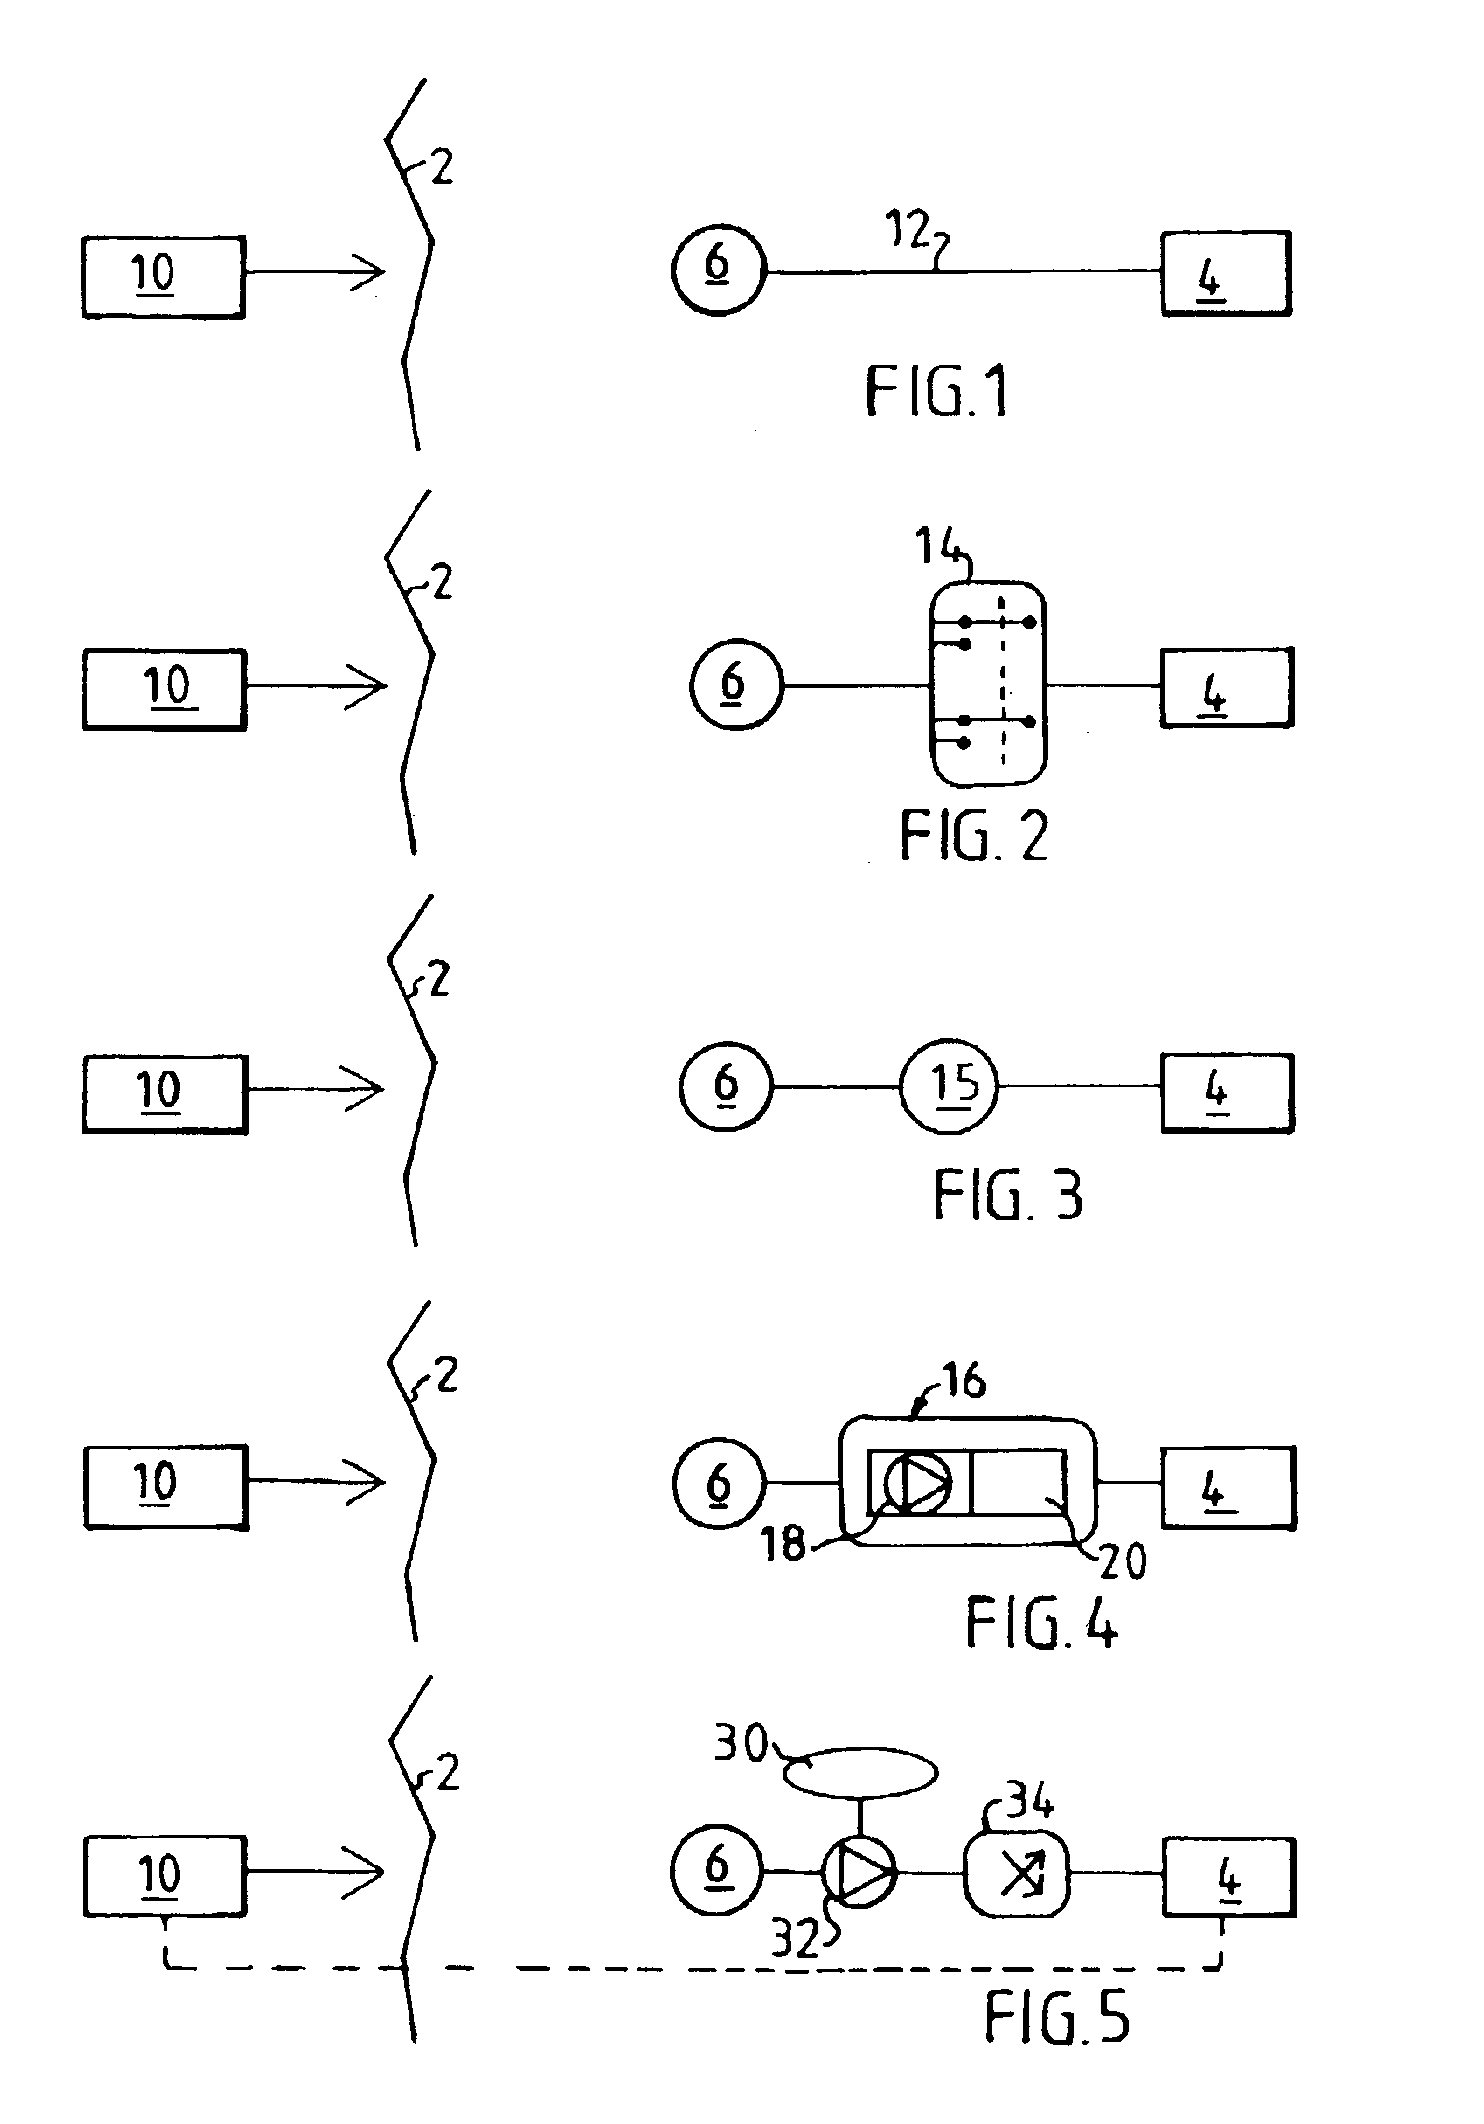 Male impotence prosthesis apparatus with wireless energy supply